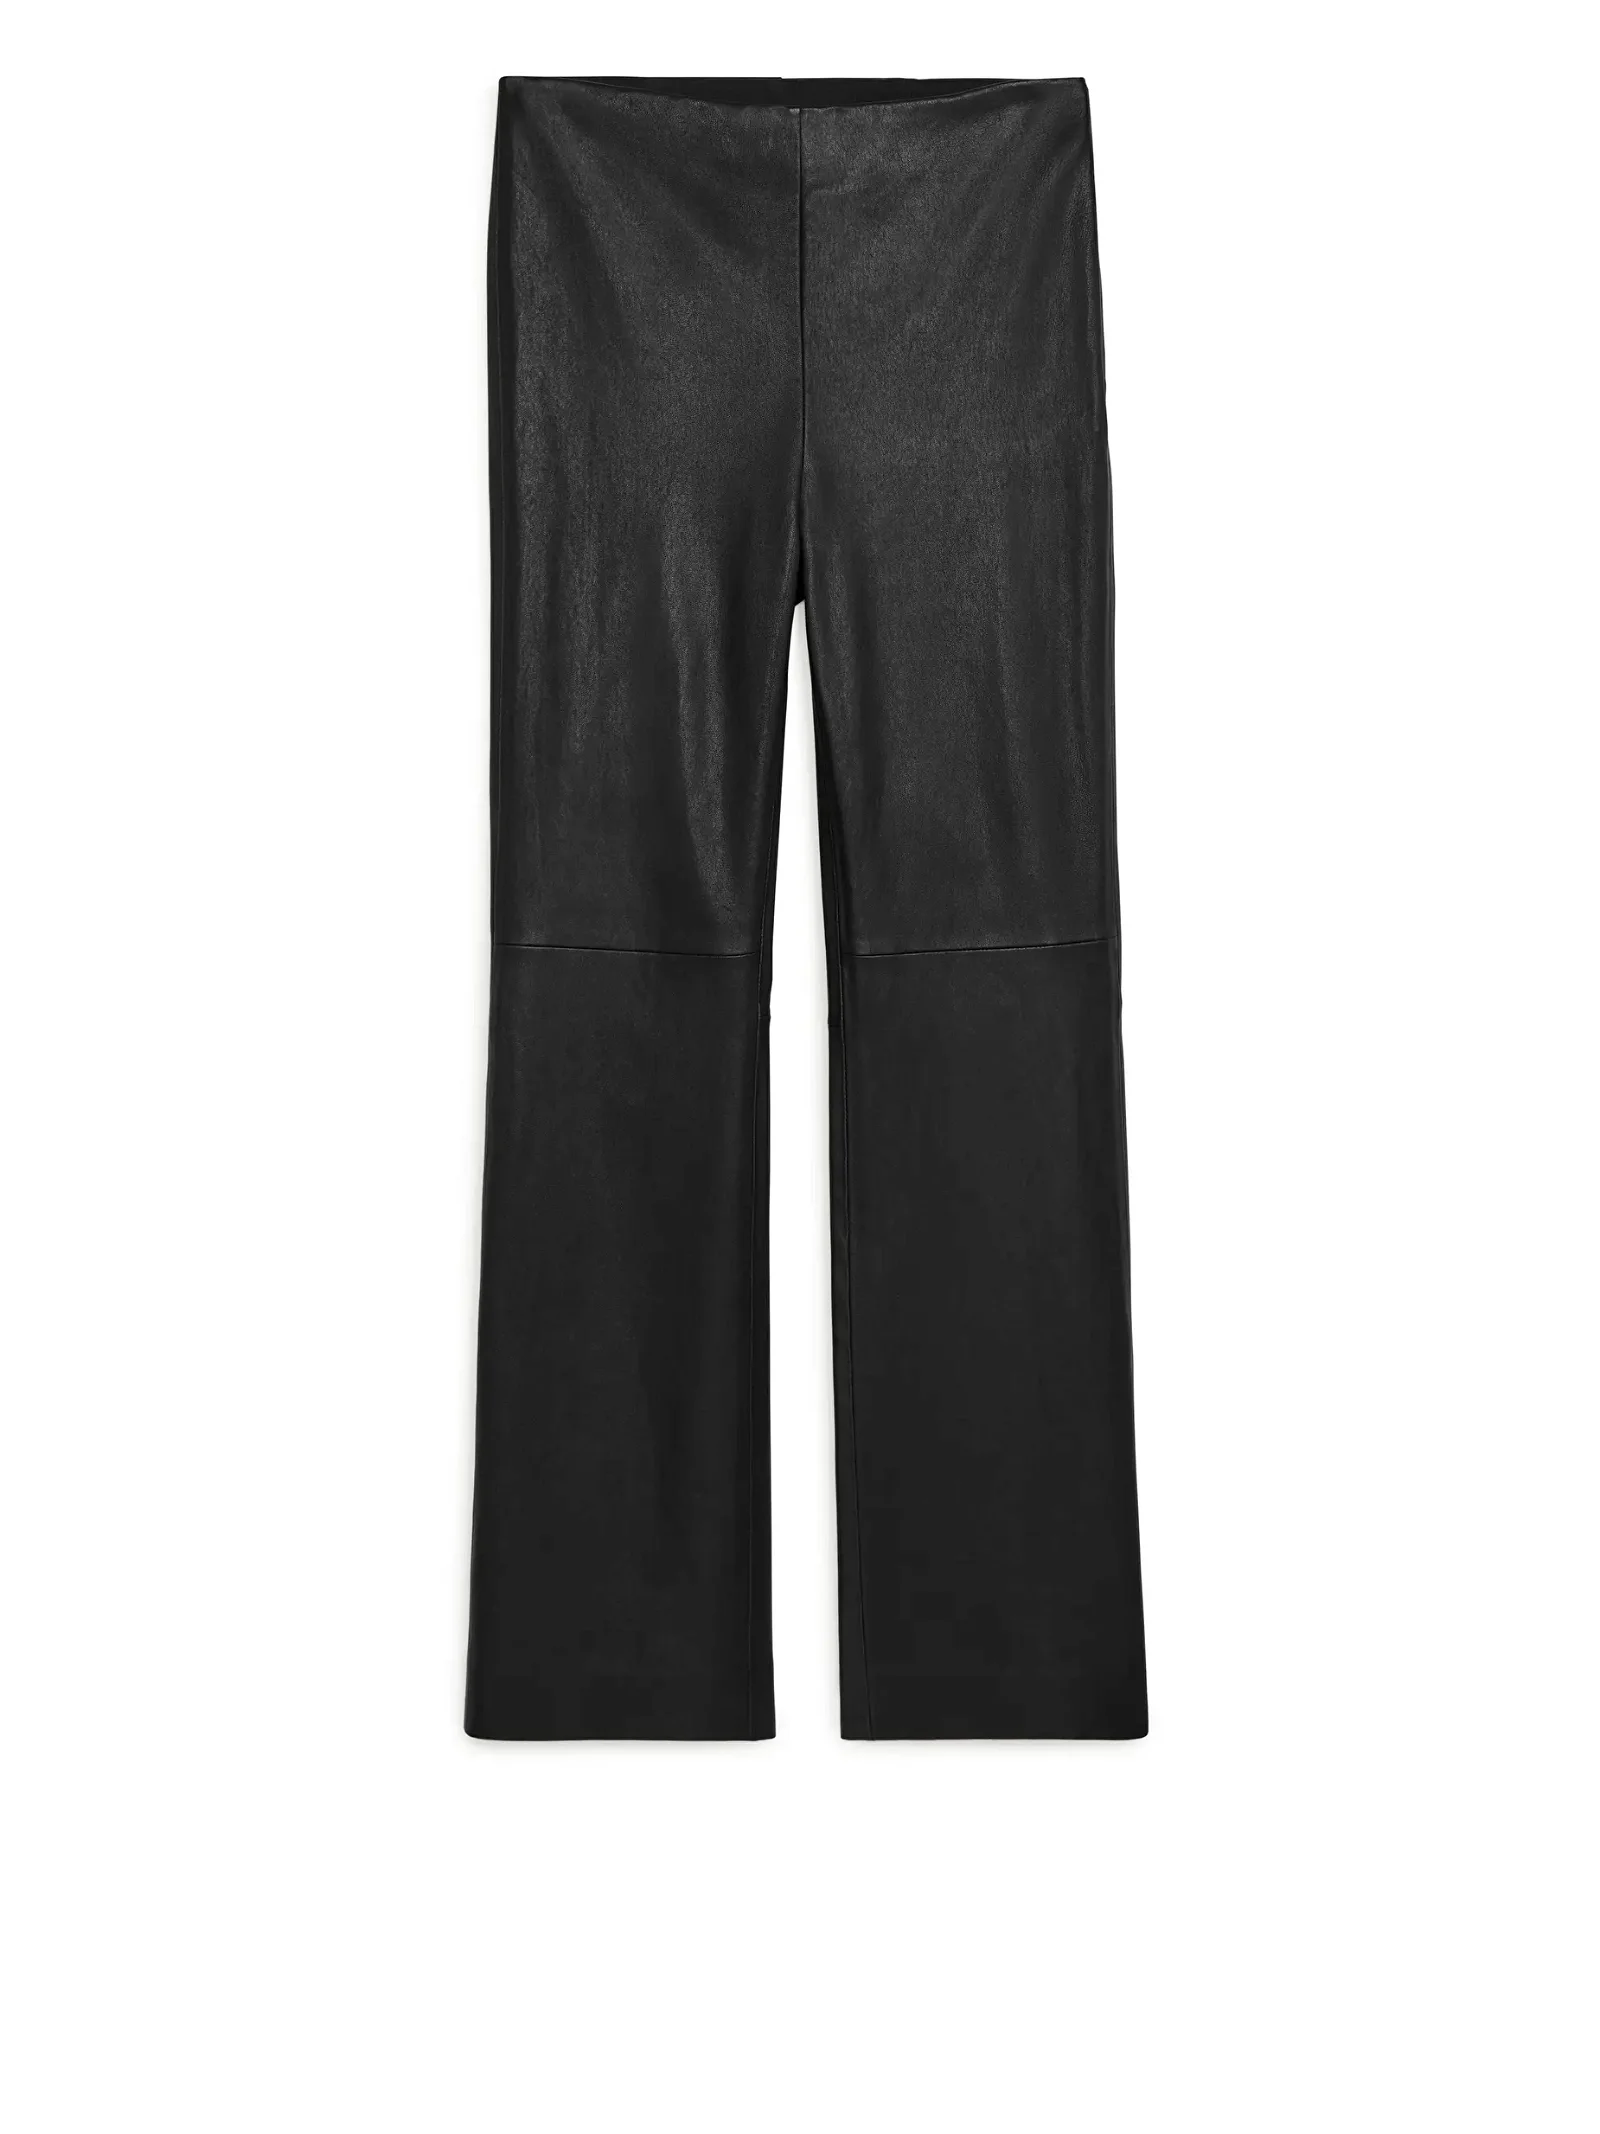 ARKET Kick Flare Stretch Leather Trousers in Black